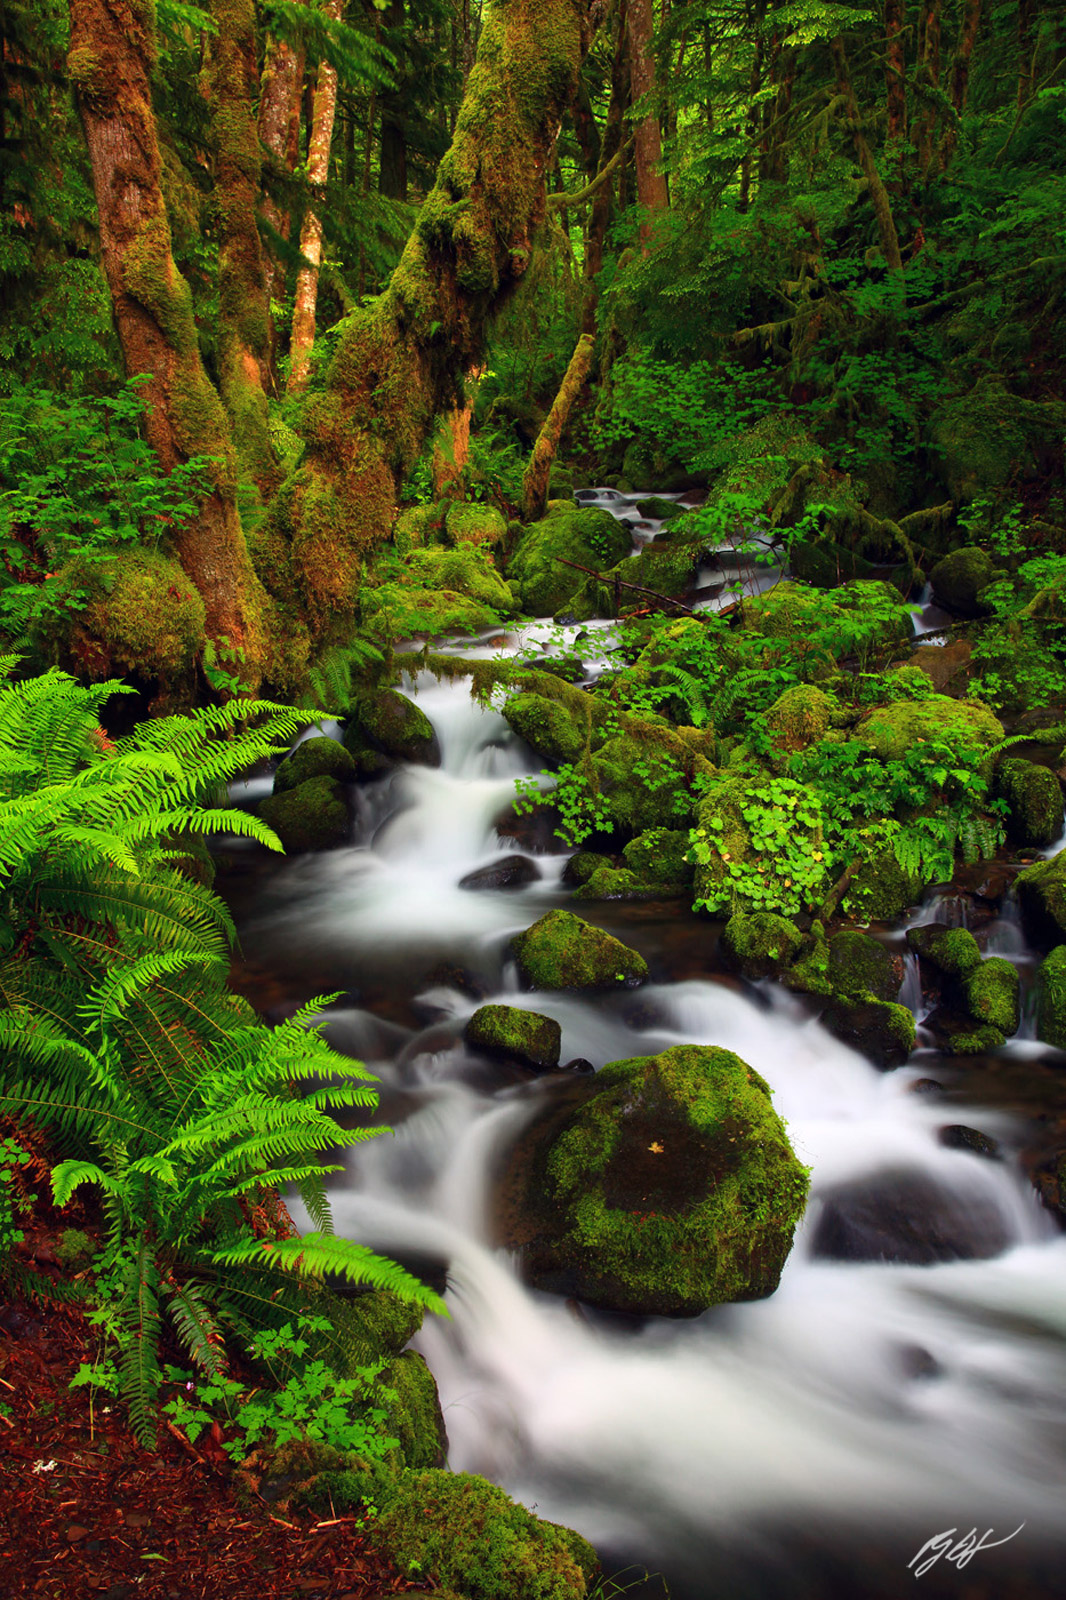 Mossy Maples and Ruckel Creek in the Columbia River Gorge in Oregon